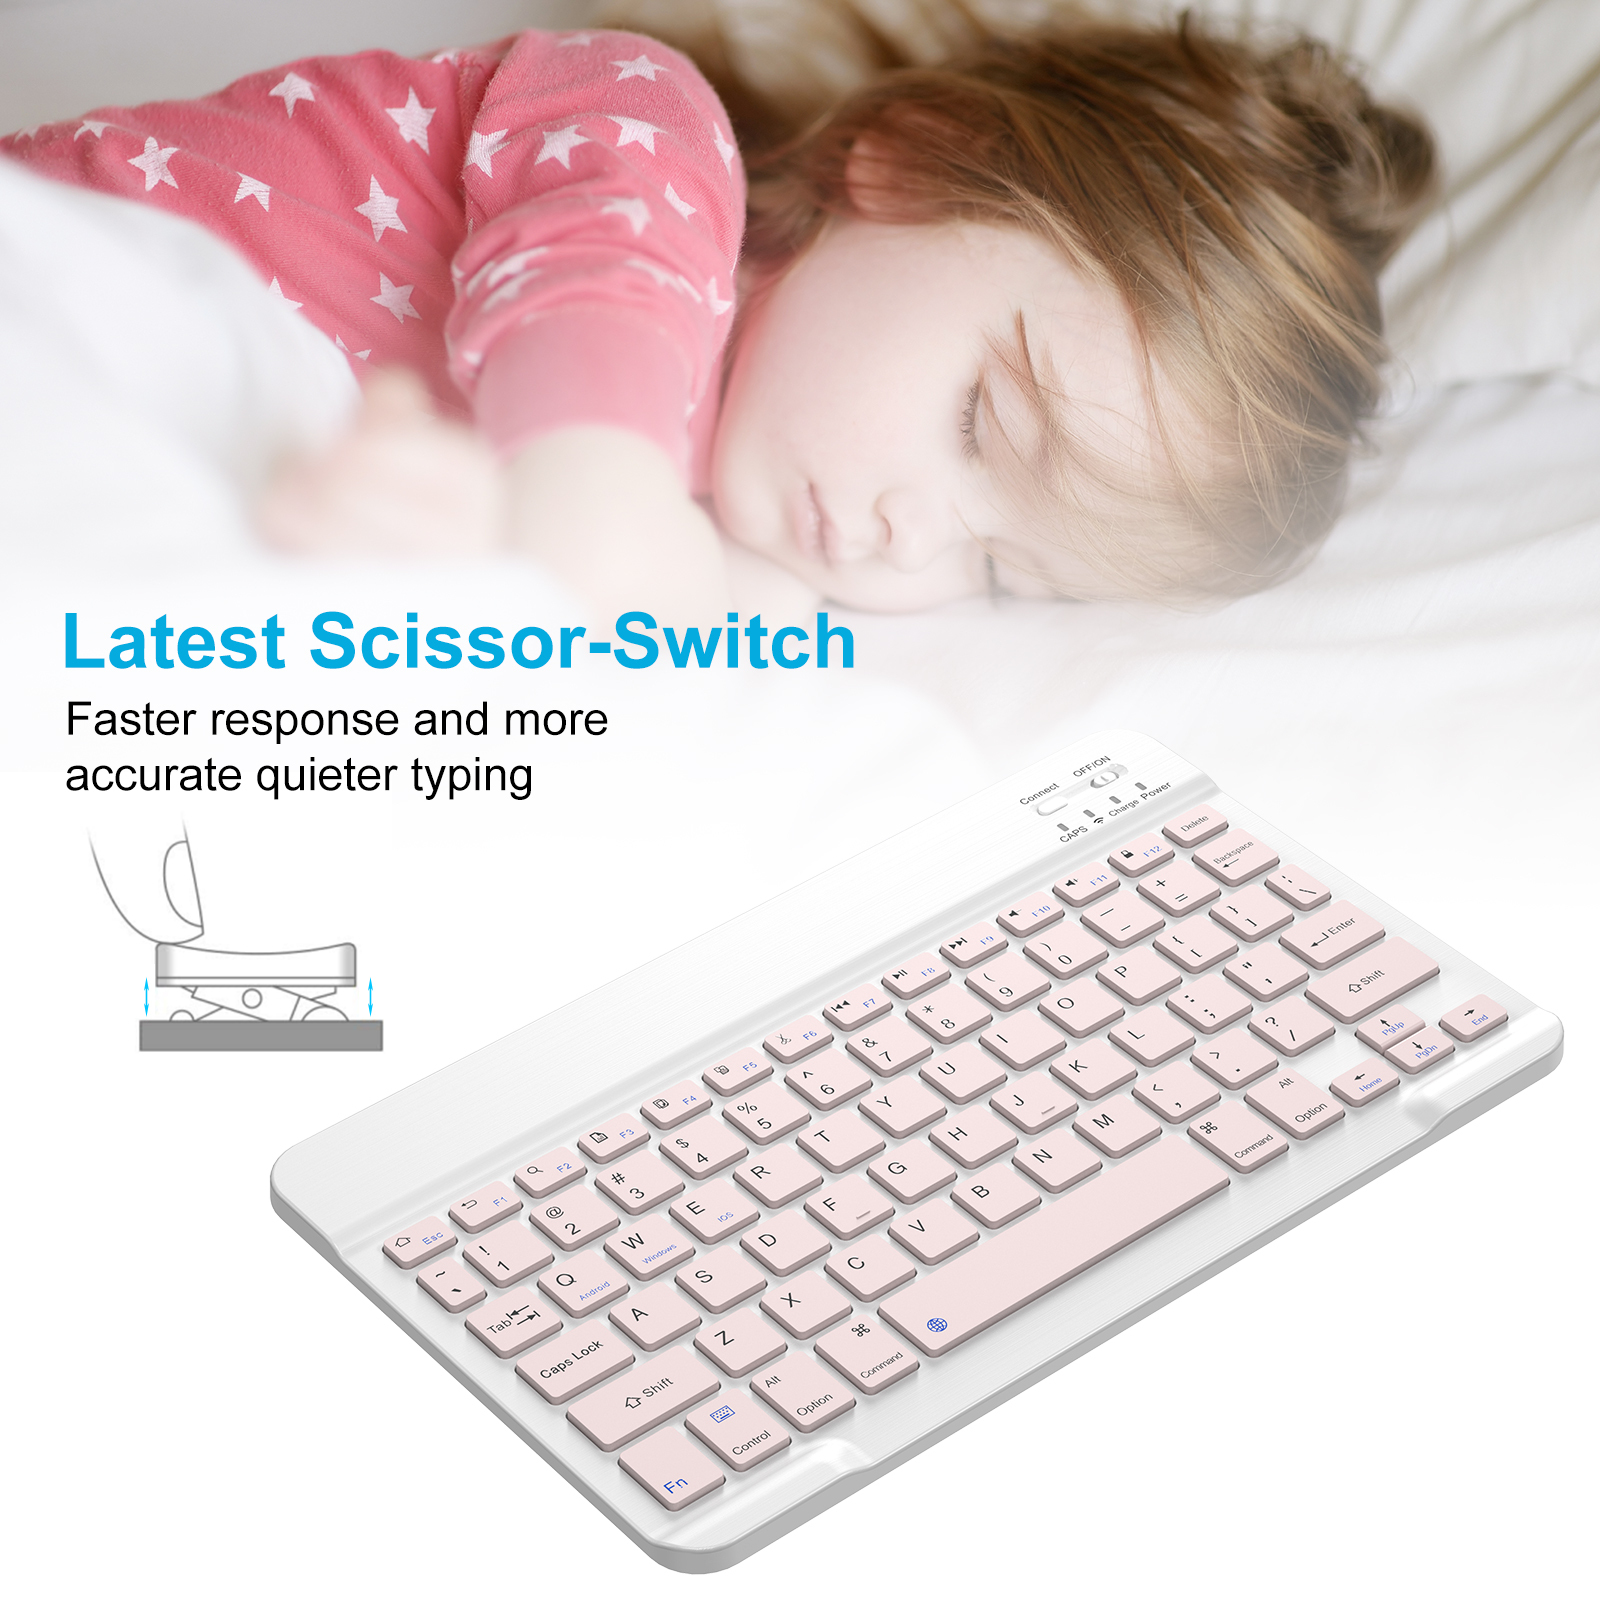 Cimetech Bluetooth Keyboard, Ultra-Slim Wireless Keyboard Quiet Portable Design with Built-in Rechargeable Battery for IOS, Mac, iPad, Windows and Android 3.0 and Above OS Pink - image 2 of 8